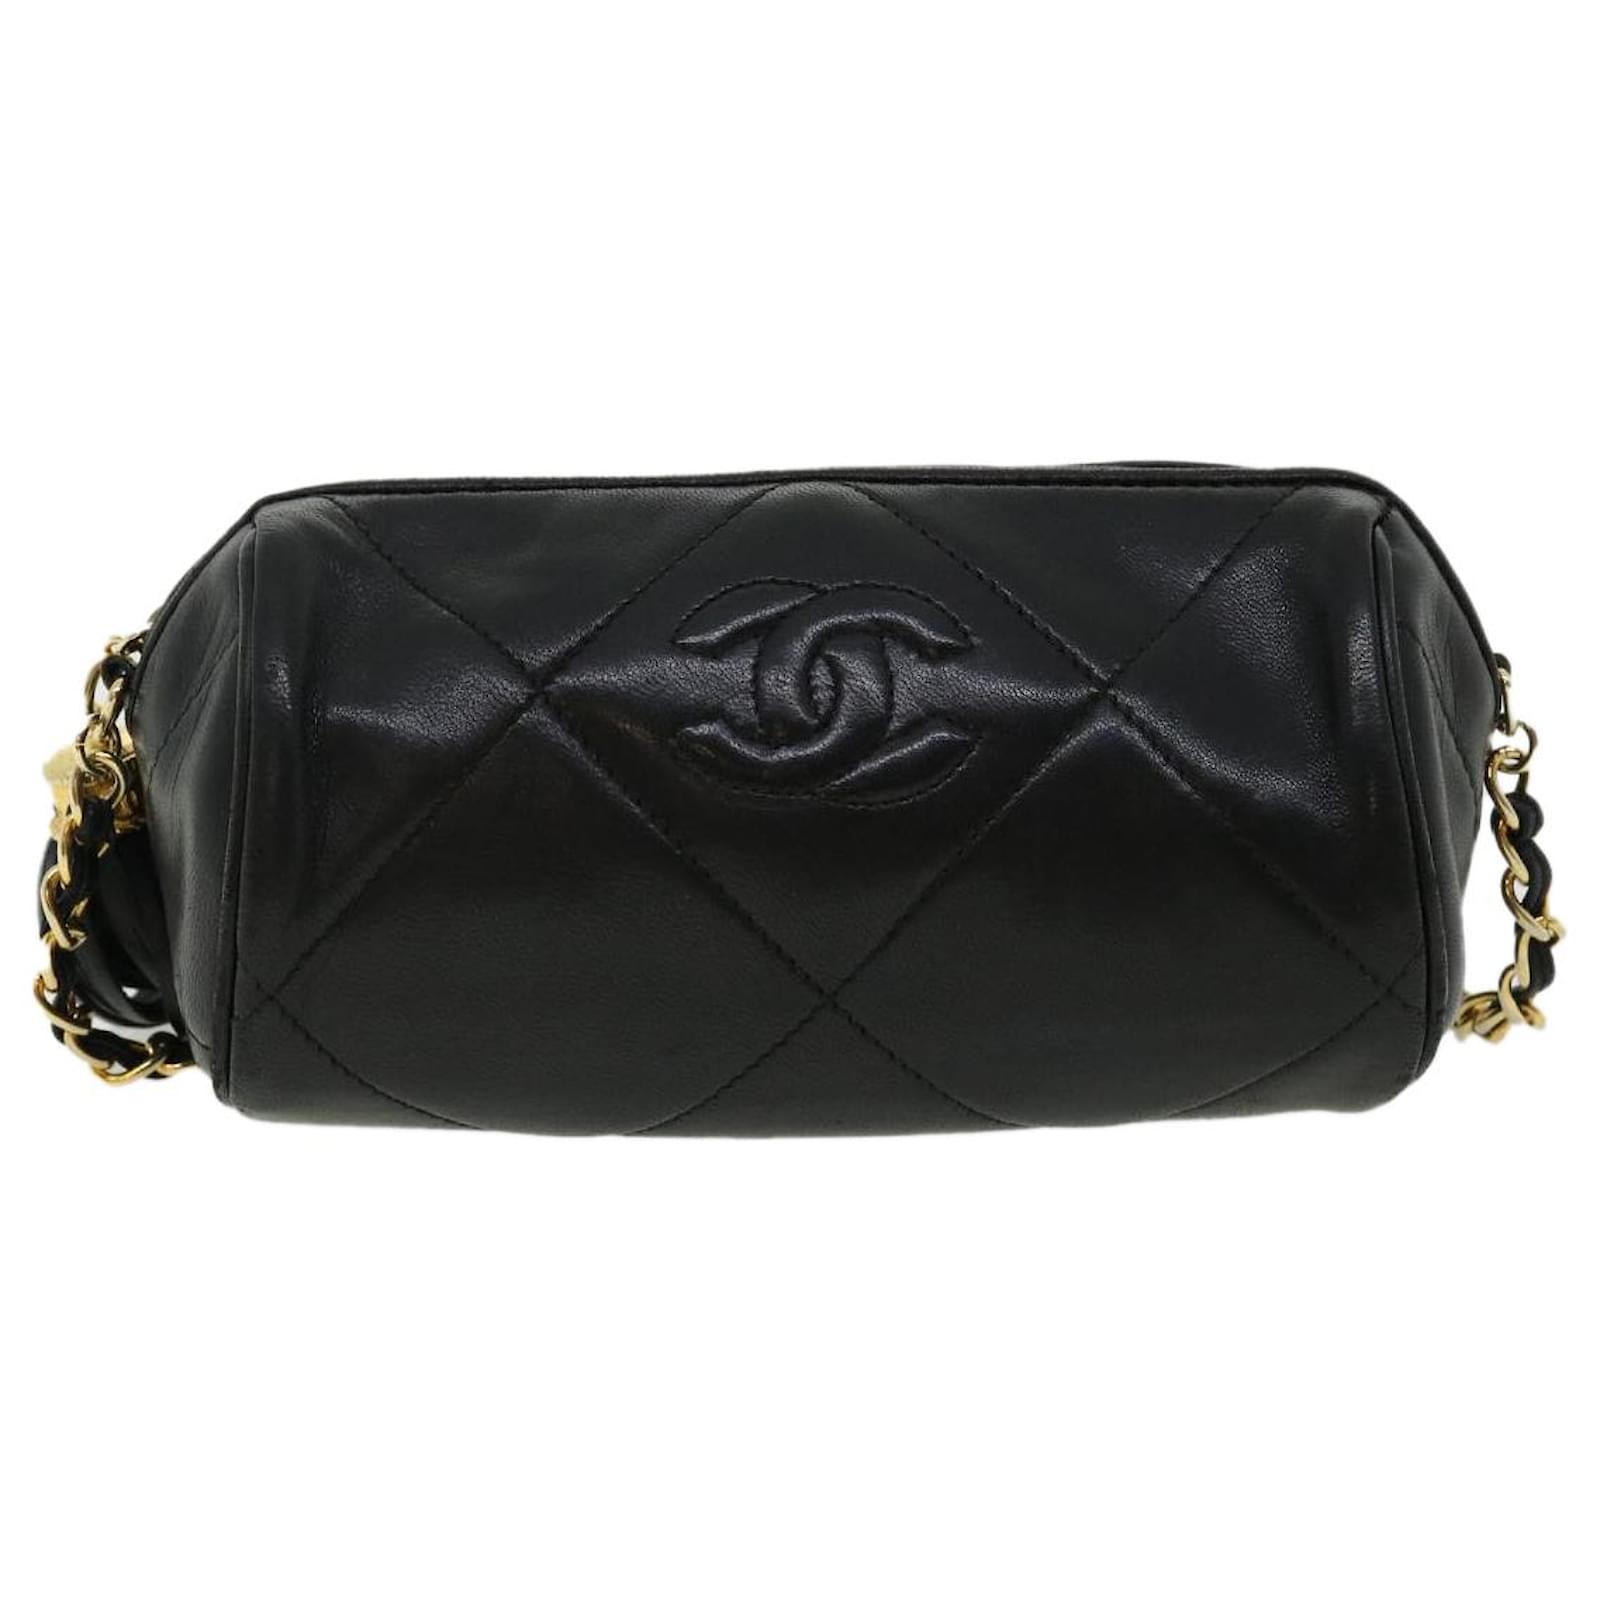 CHANEL Small Bowling Bag Black_Chanel_BRANDS_MILAN CLASSIC Luxury Trade  Company Since 2007